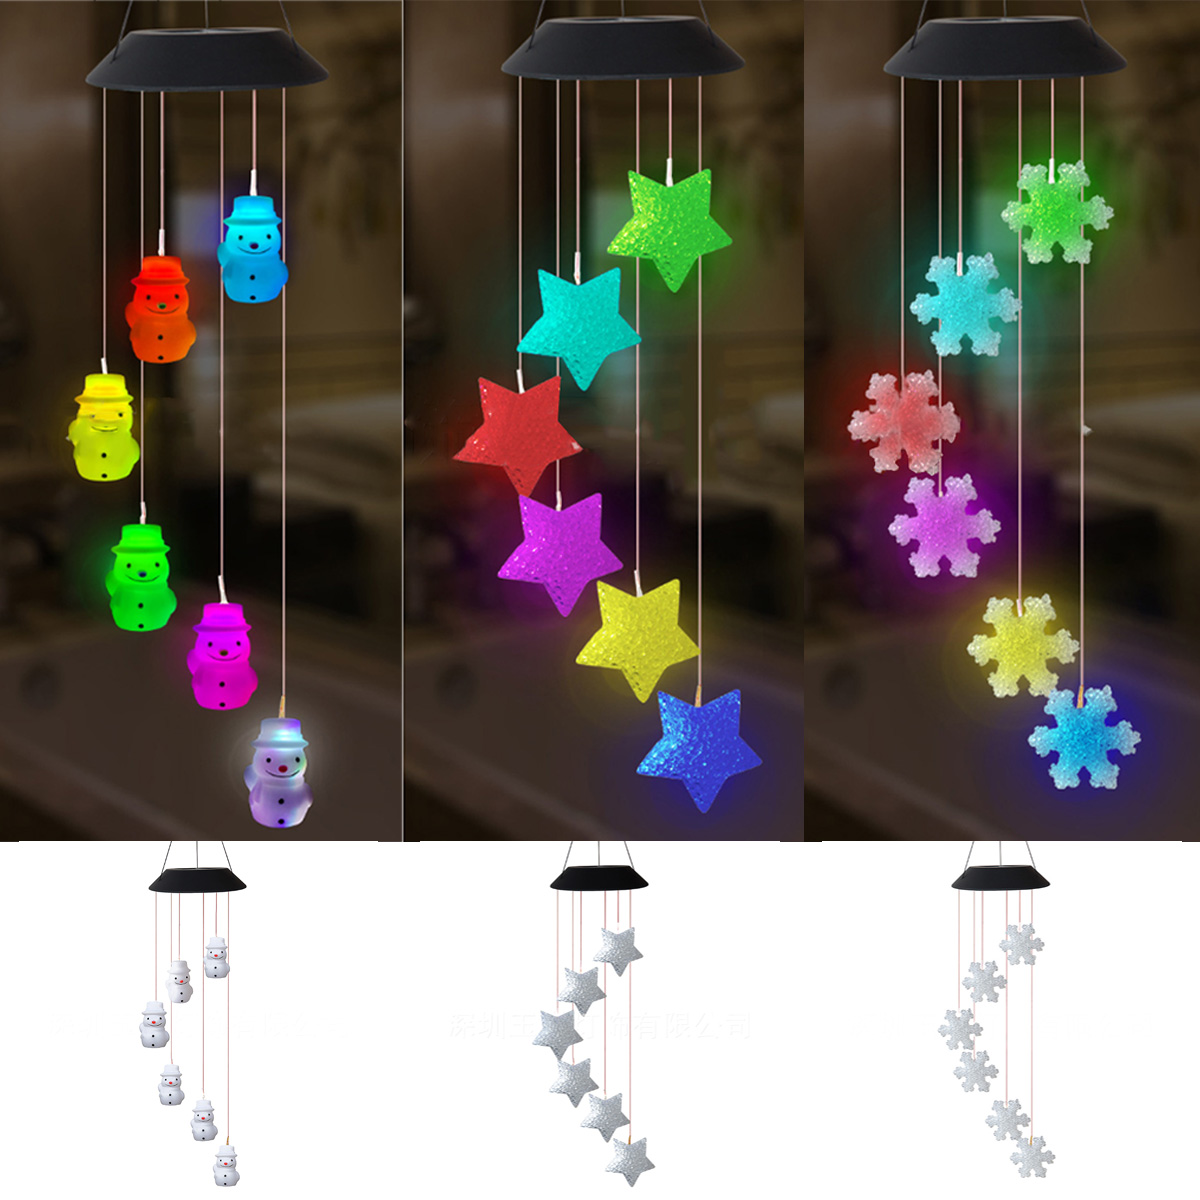 LED-Colour-Changing-Hanging-Wind-Chimes-Solar-Powered-Ball-Lights-Garden-Outdoor-1760757-1